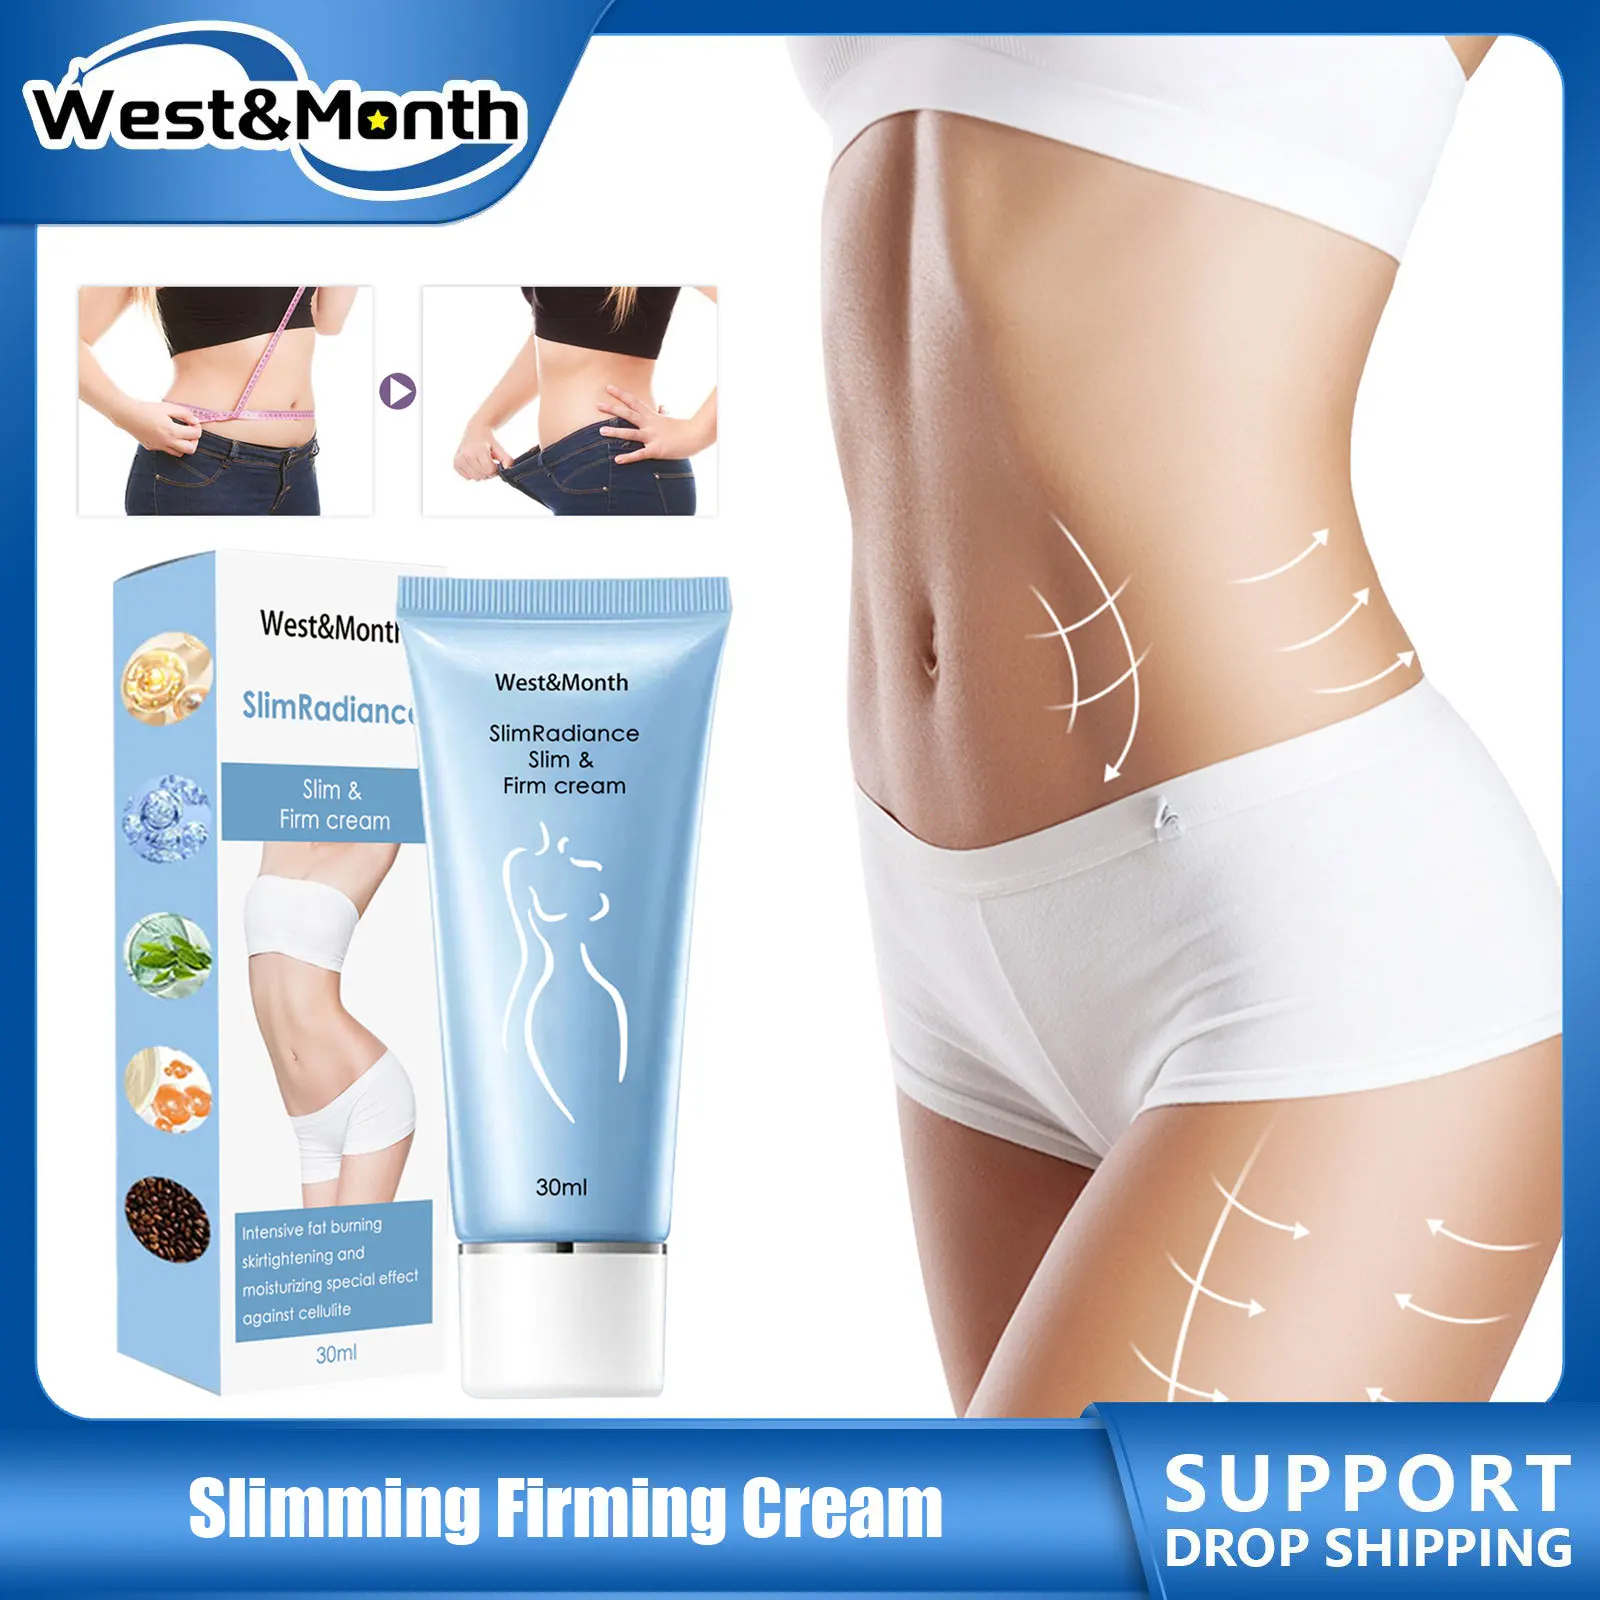 Body Slimming Cream Remove Cellulite Shaping Belly Fat Burner Massage Tightening Firming Improve Sagging Skin Weight Loss Cream hot massage cream cellulite hot cream body slimming firming fat burner for tightening skin weight loss body shaper 100g